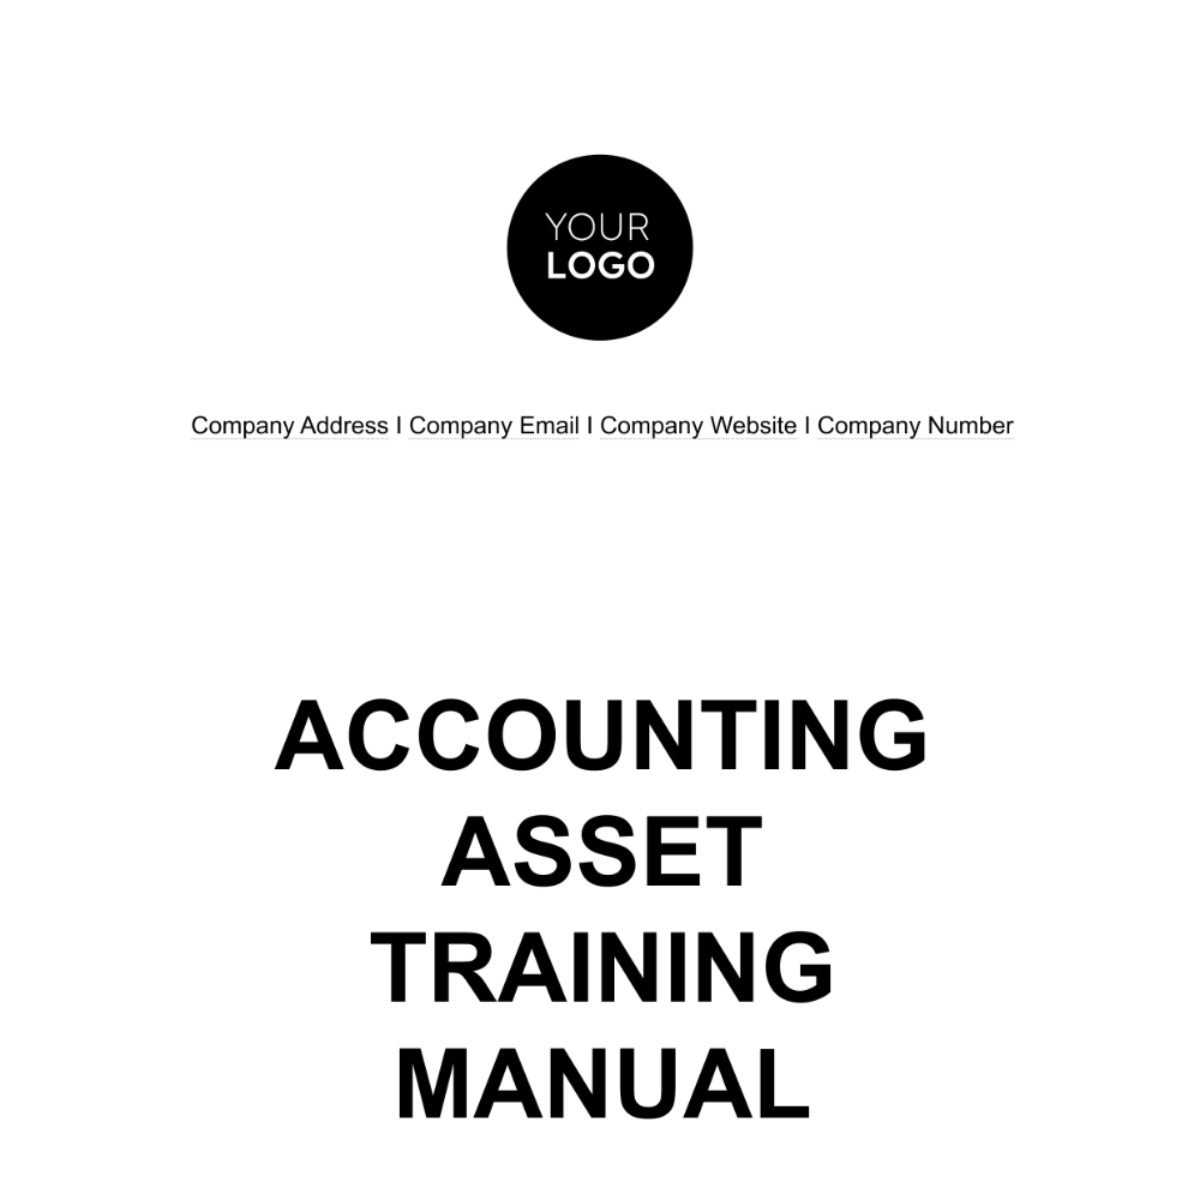 Accounting Asset Training Manual Template